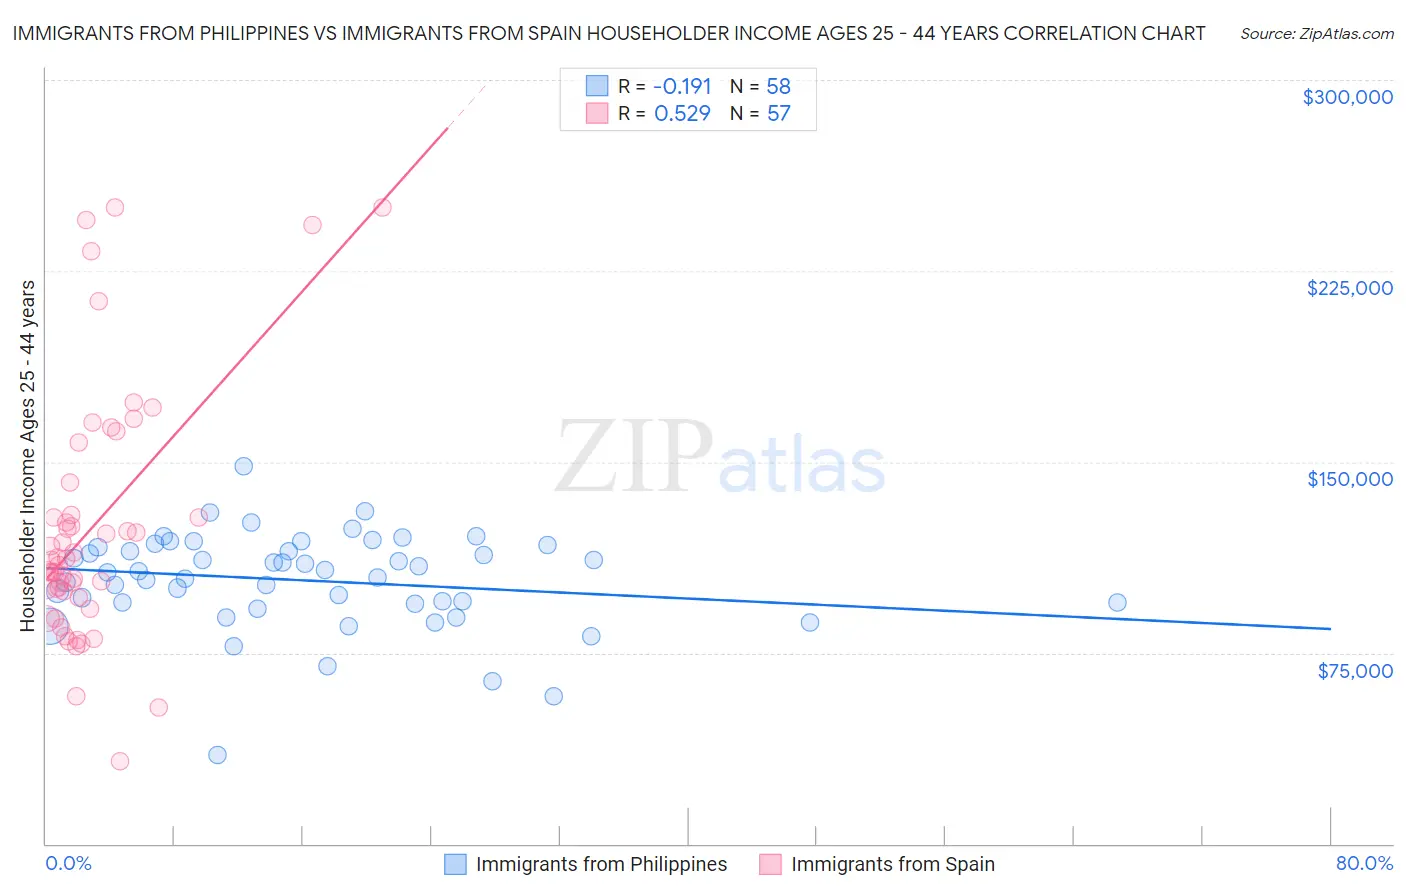 Immigrants from Philippines vs Immigrants from Spain Householder Income Ages 25 - 44 years